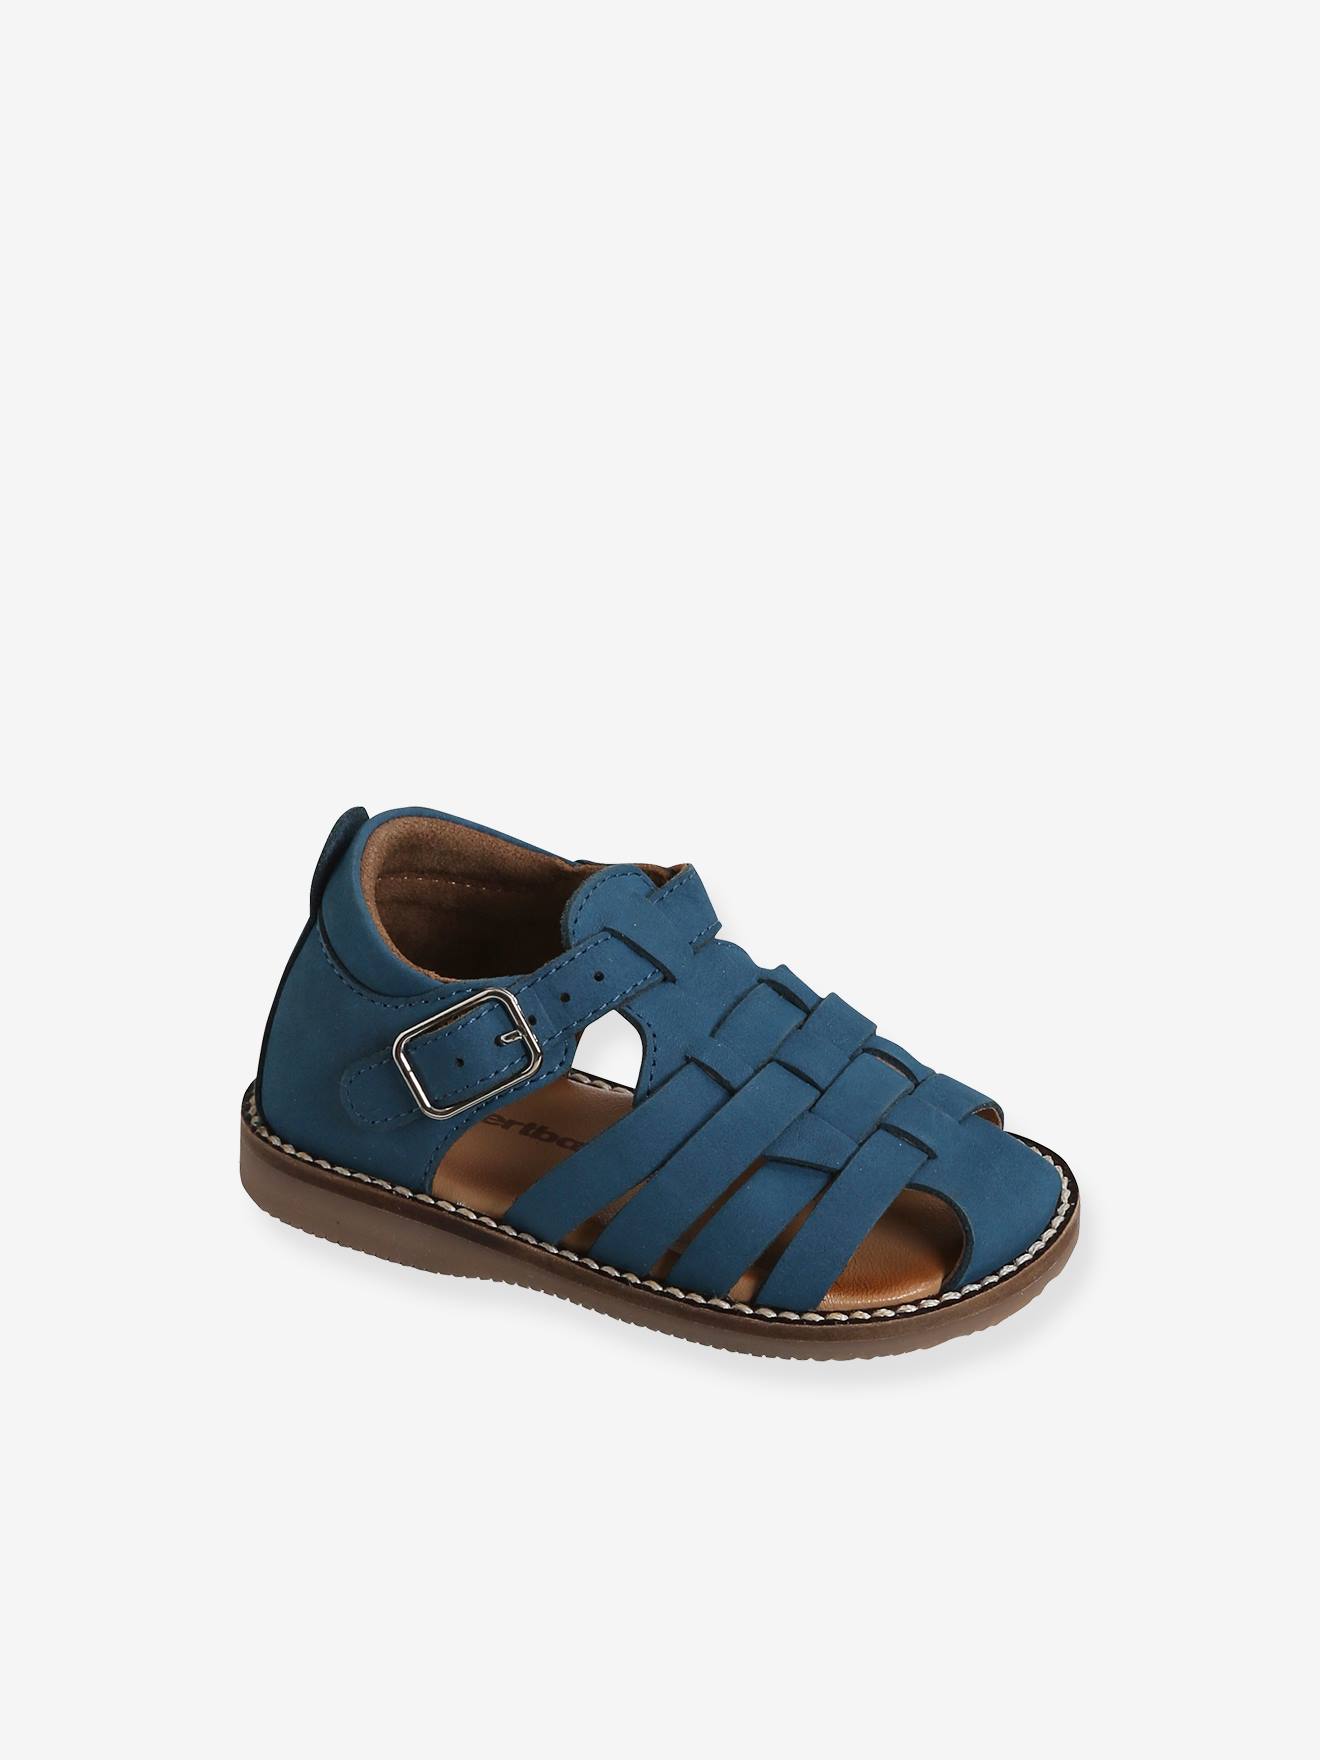 Closed-Toe Leather Sandals for Babies blue dark solid